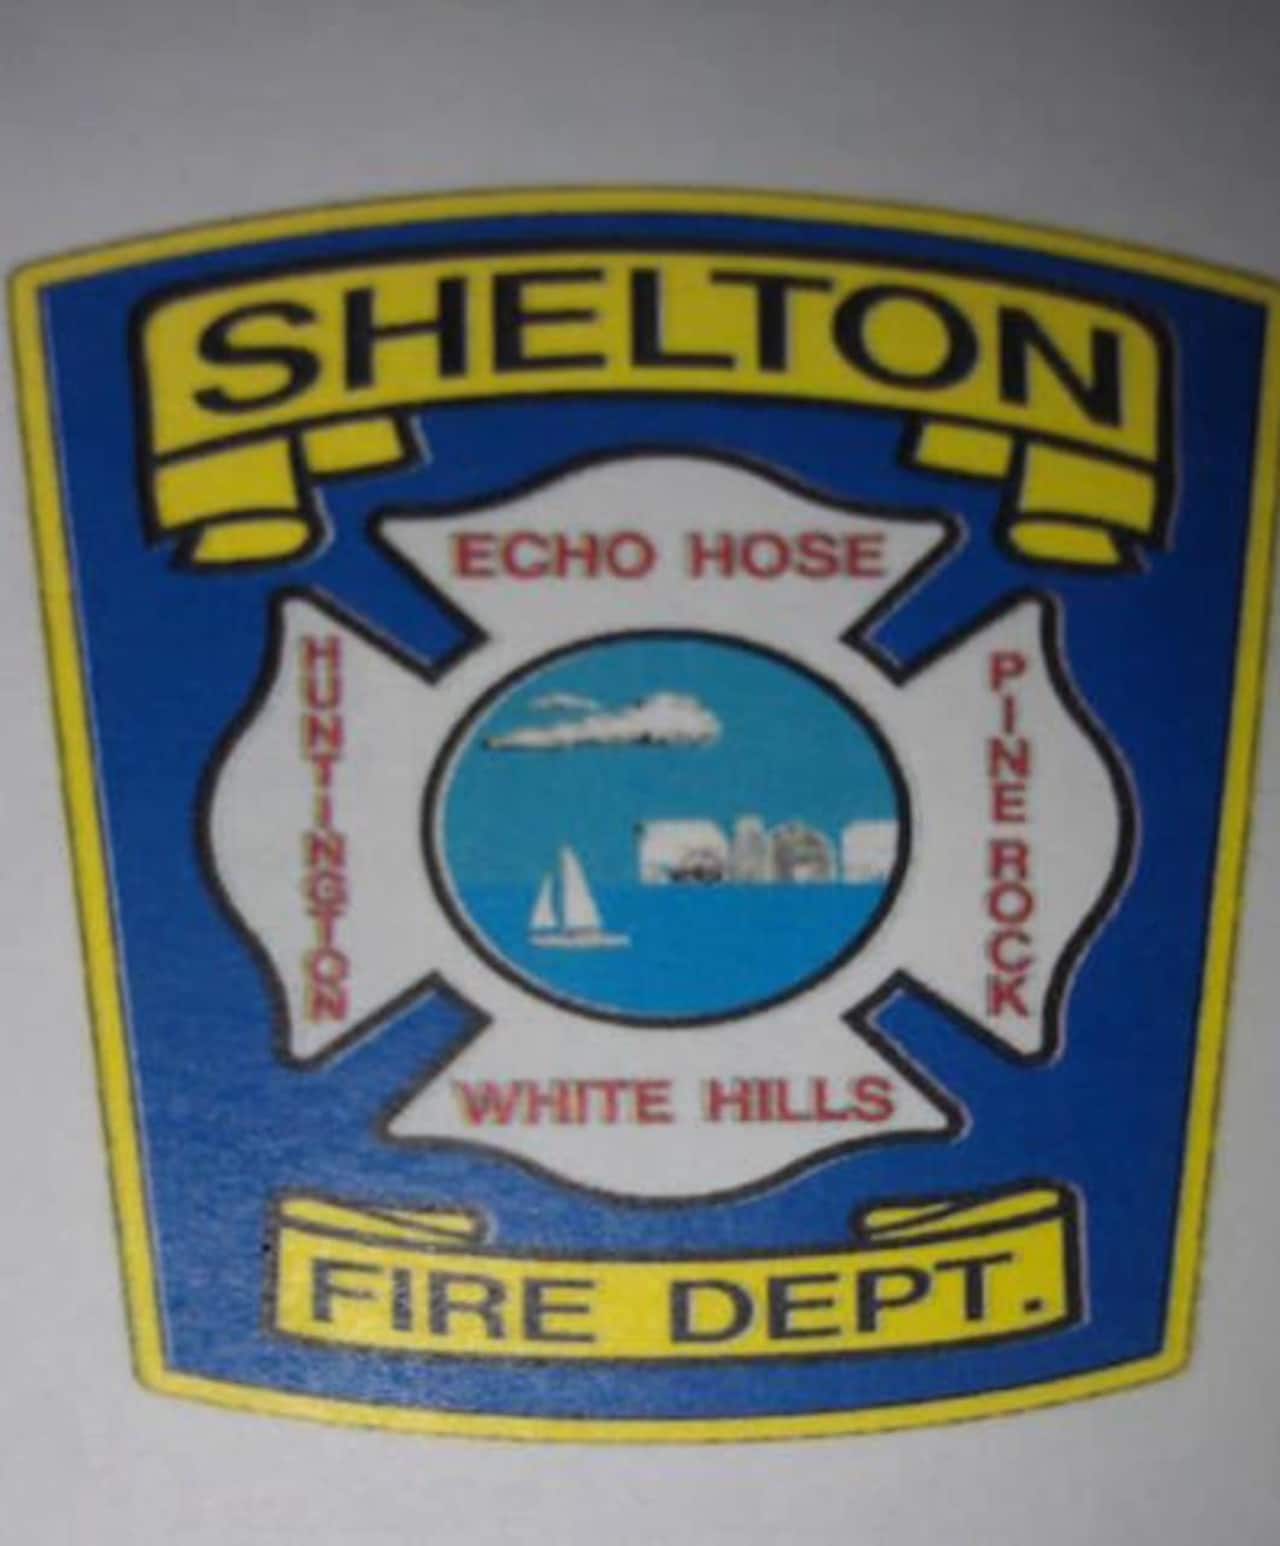 One person was killed in a fire in a mobile home on Friday evening in Shelton.